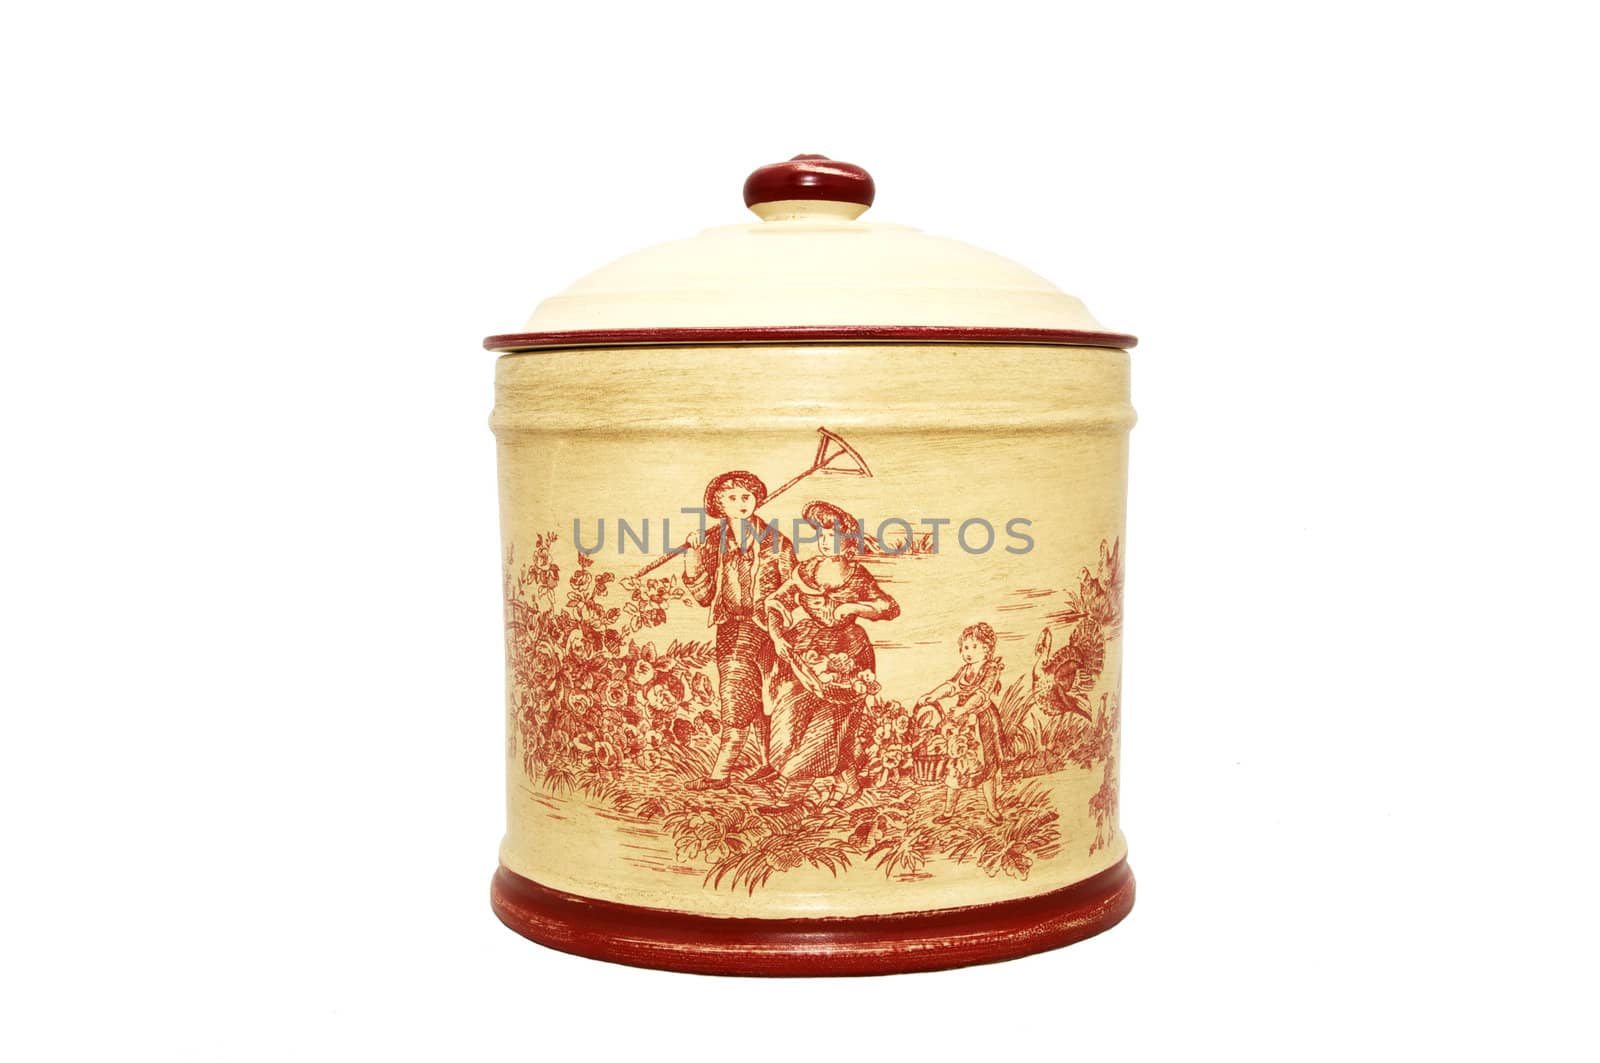 earthenware container for the kitchen on a white background